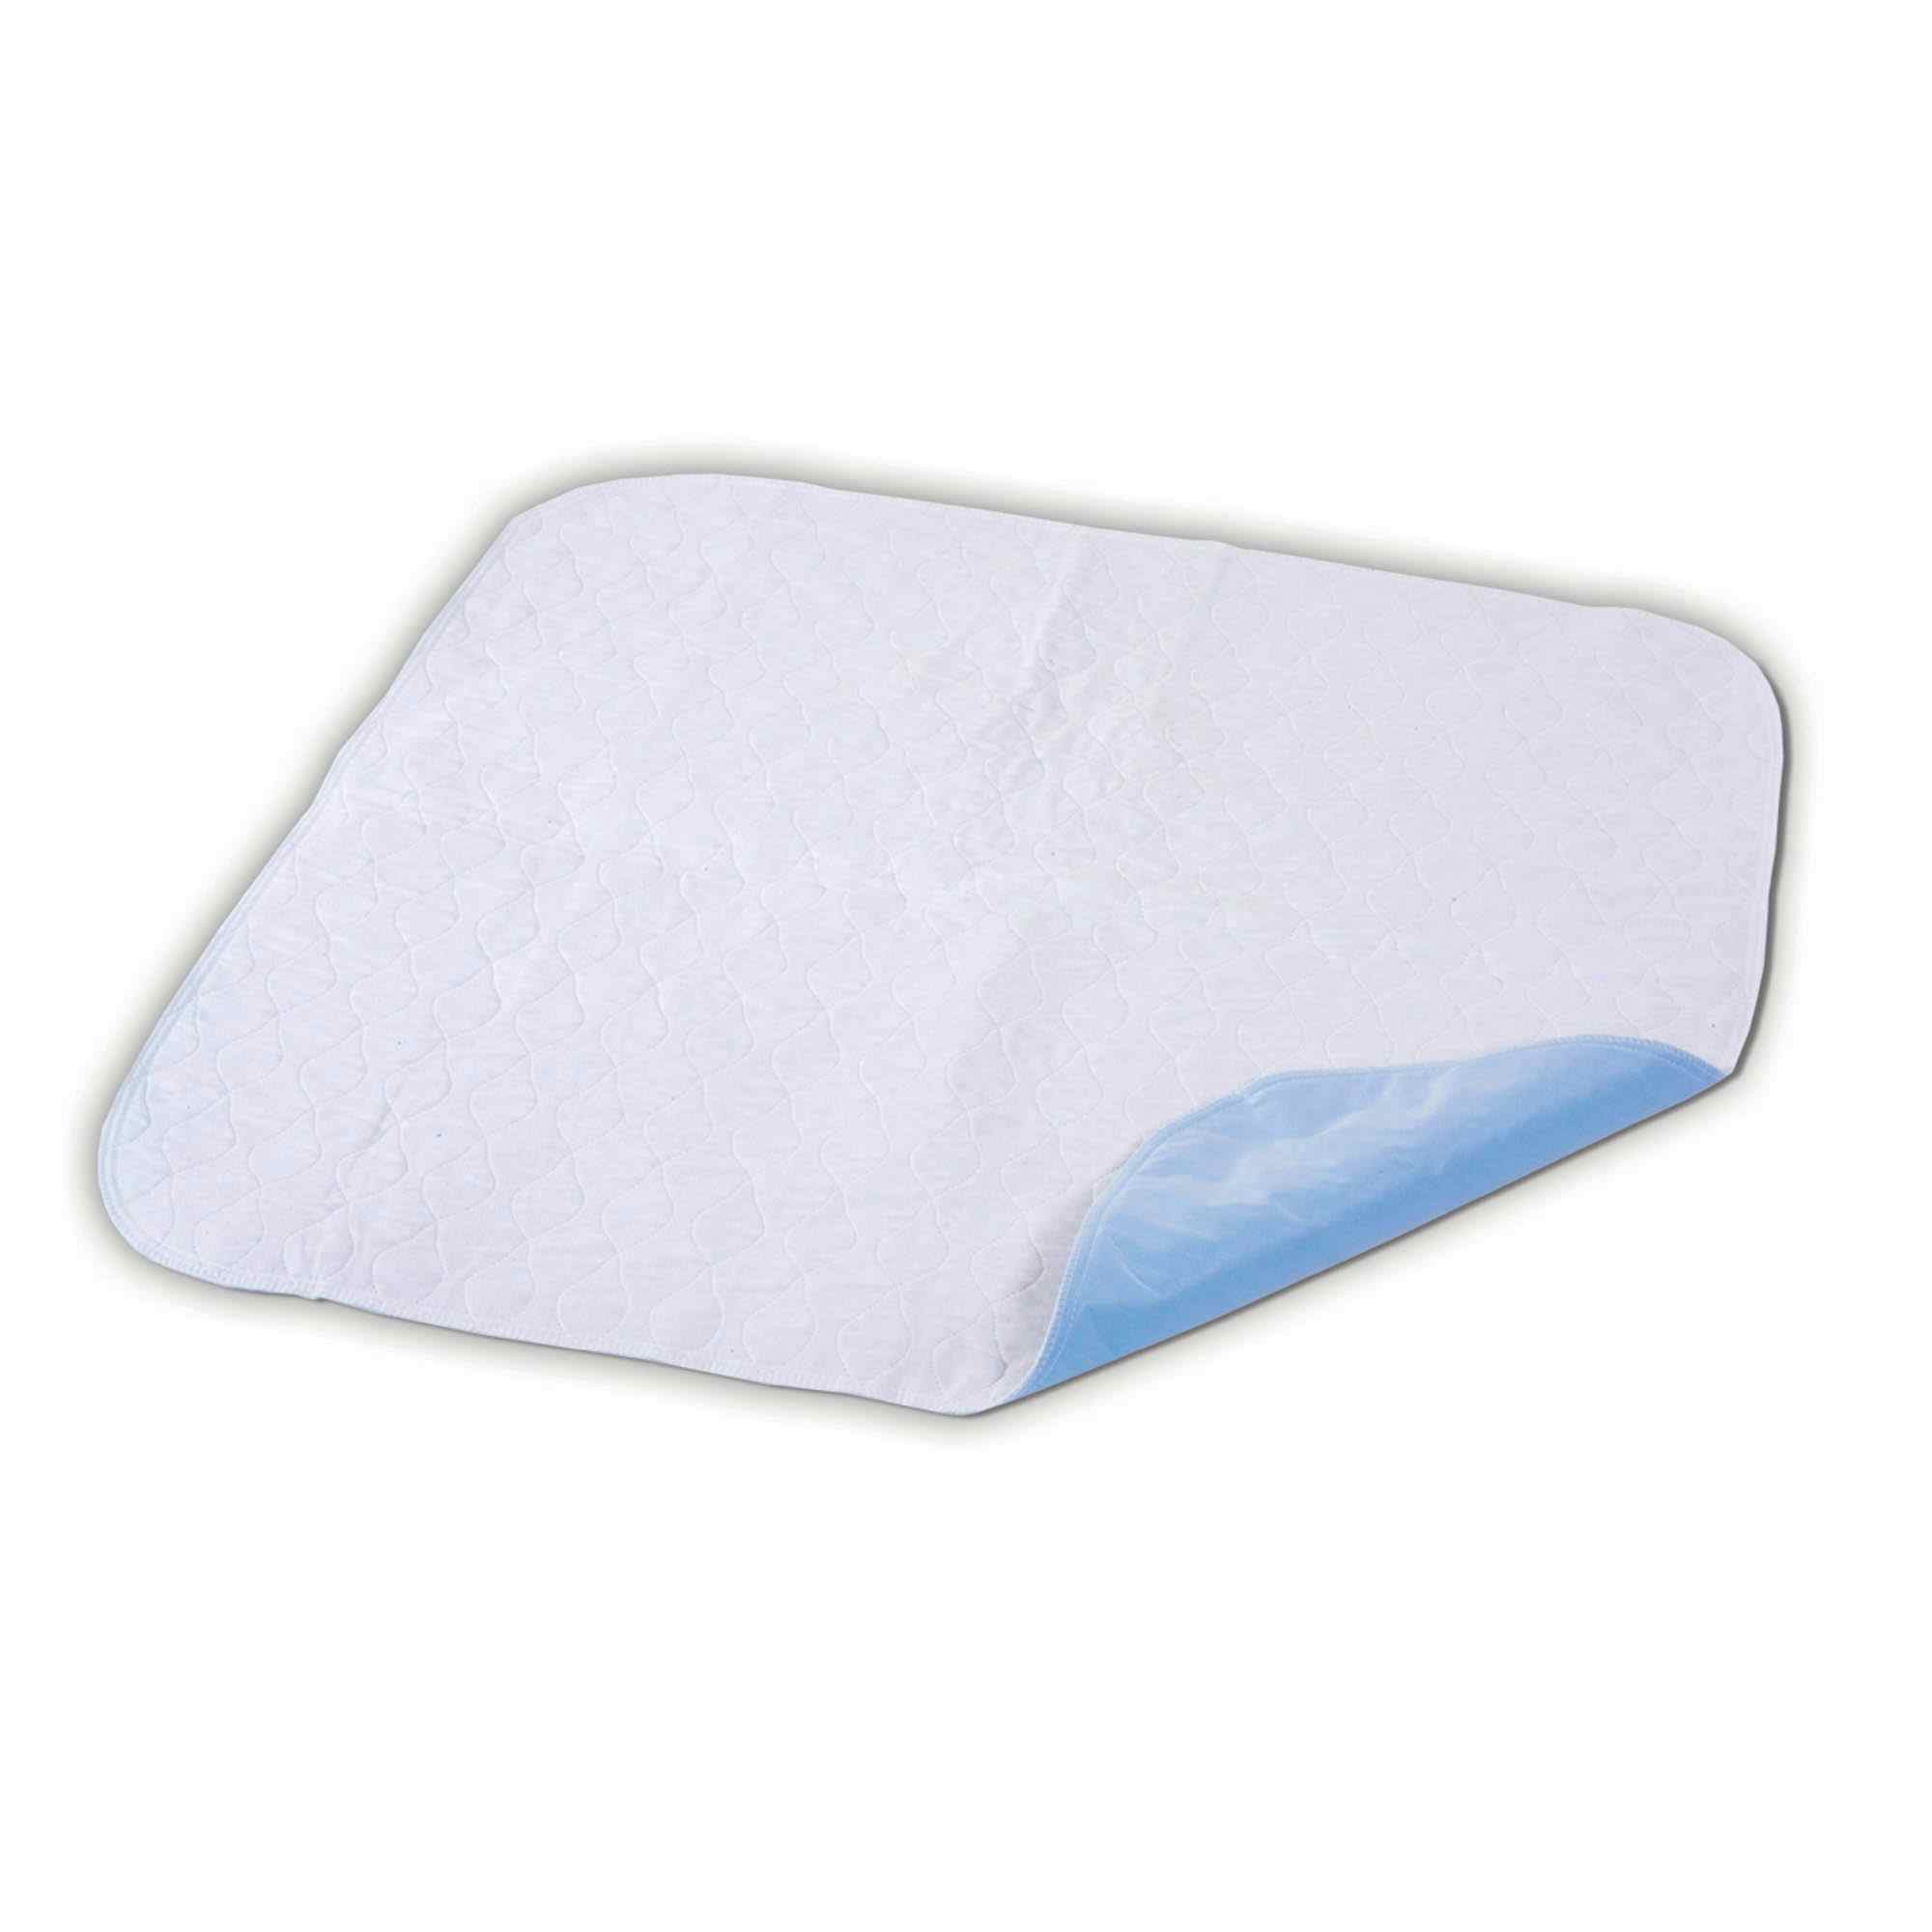 Cardinal Health Essentials Reusable Underpad, Moderate Absorbency